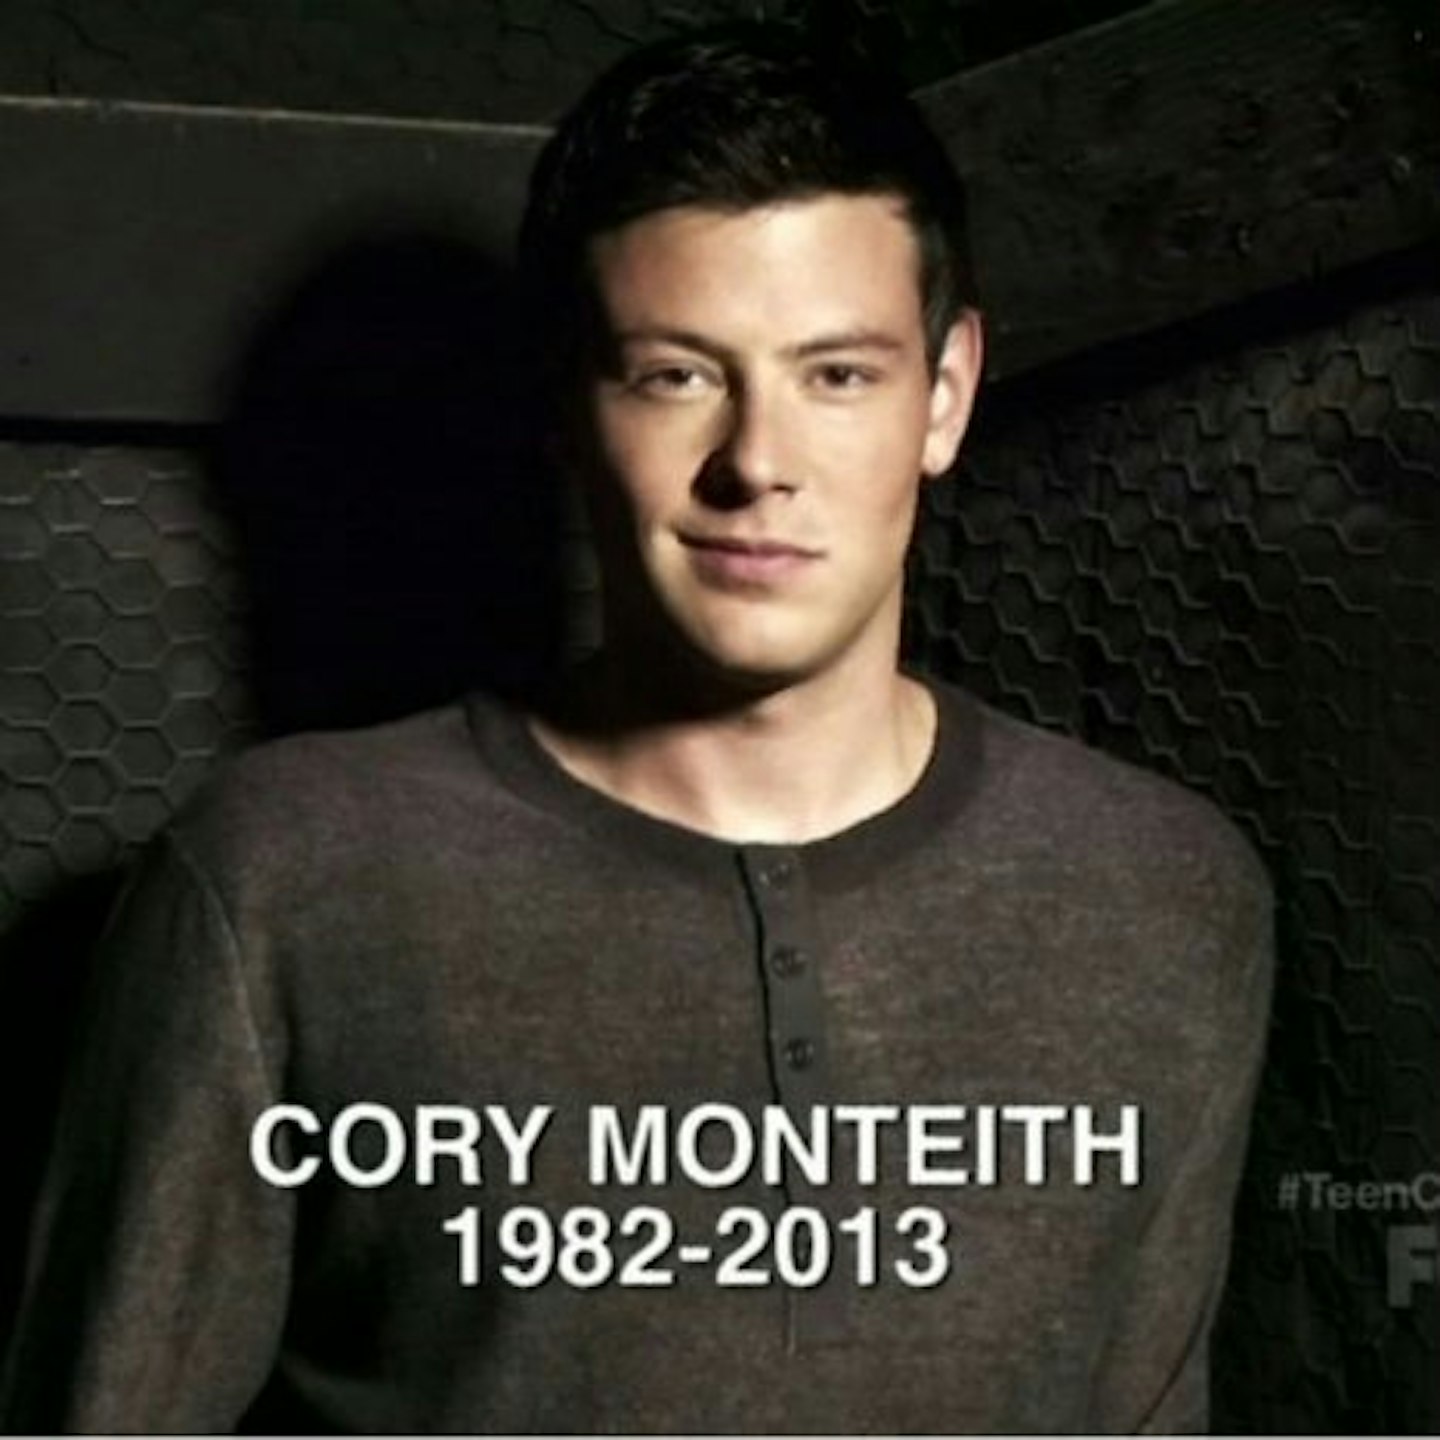 Cory Monteith died in July after an overdose